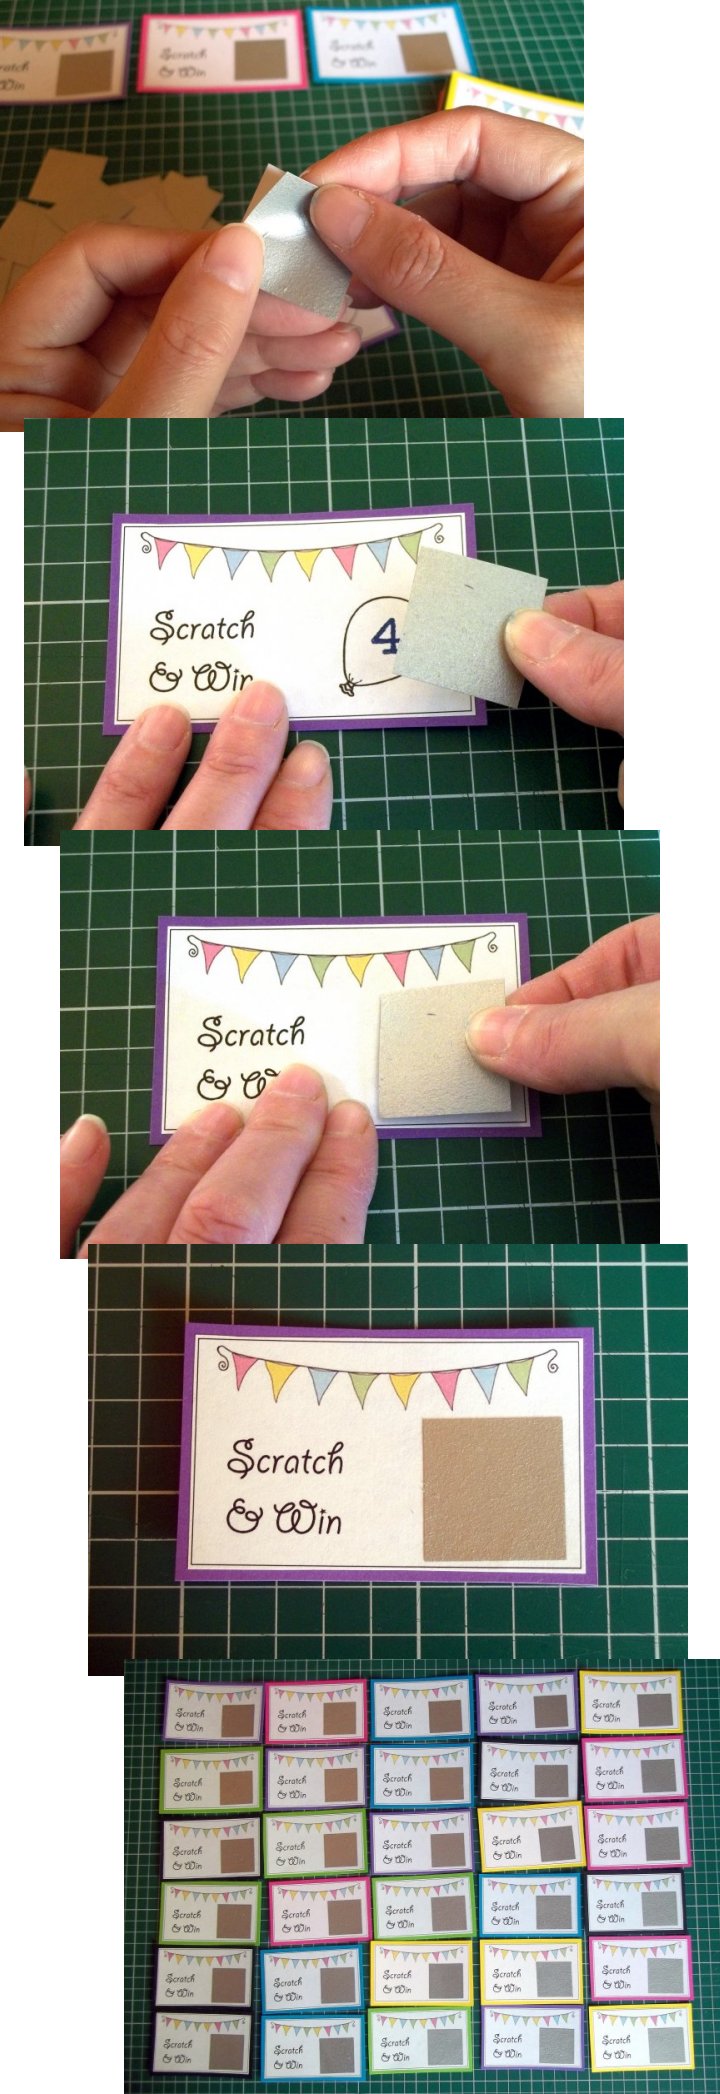 Things to make and do - Scratch Cards